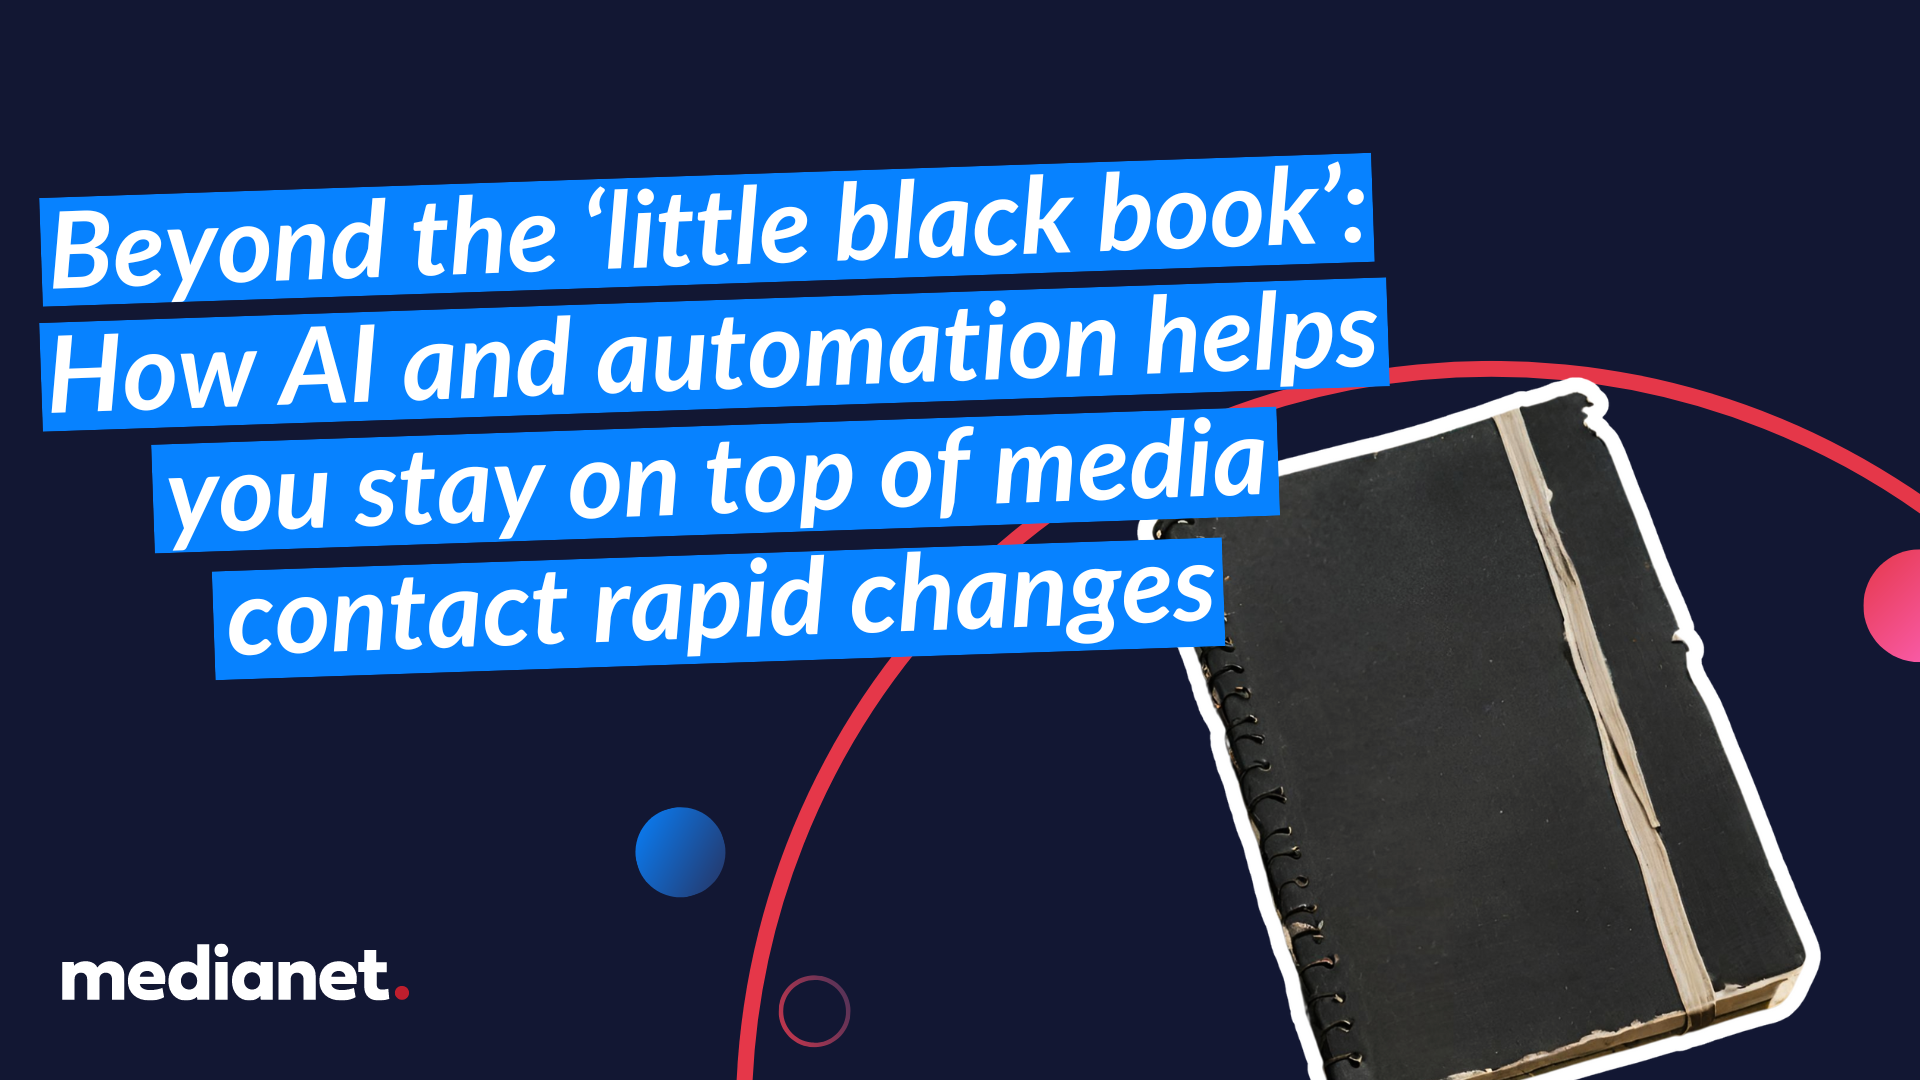 Beyond the ‘little black book’: How AI and automation helps you stay on top of media contact rapid changes